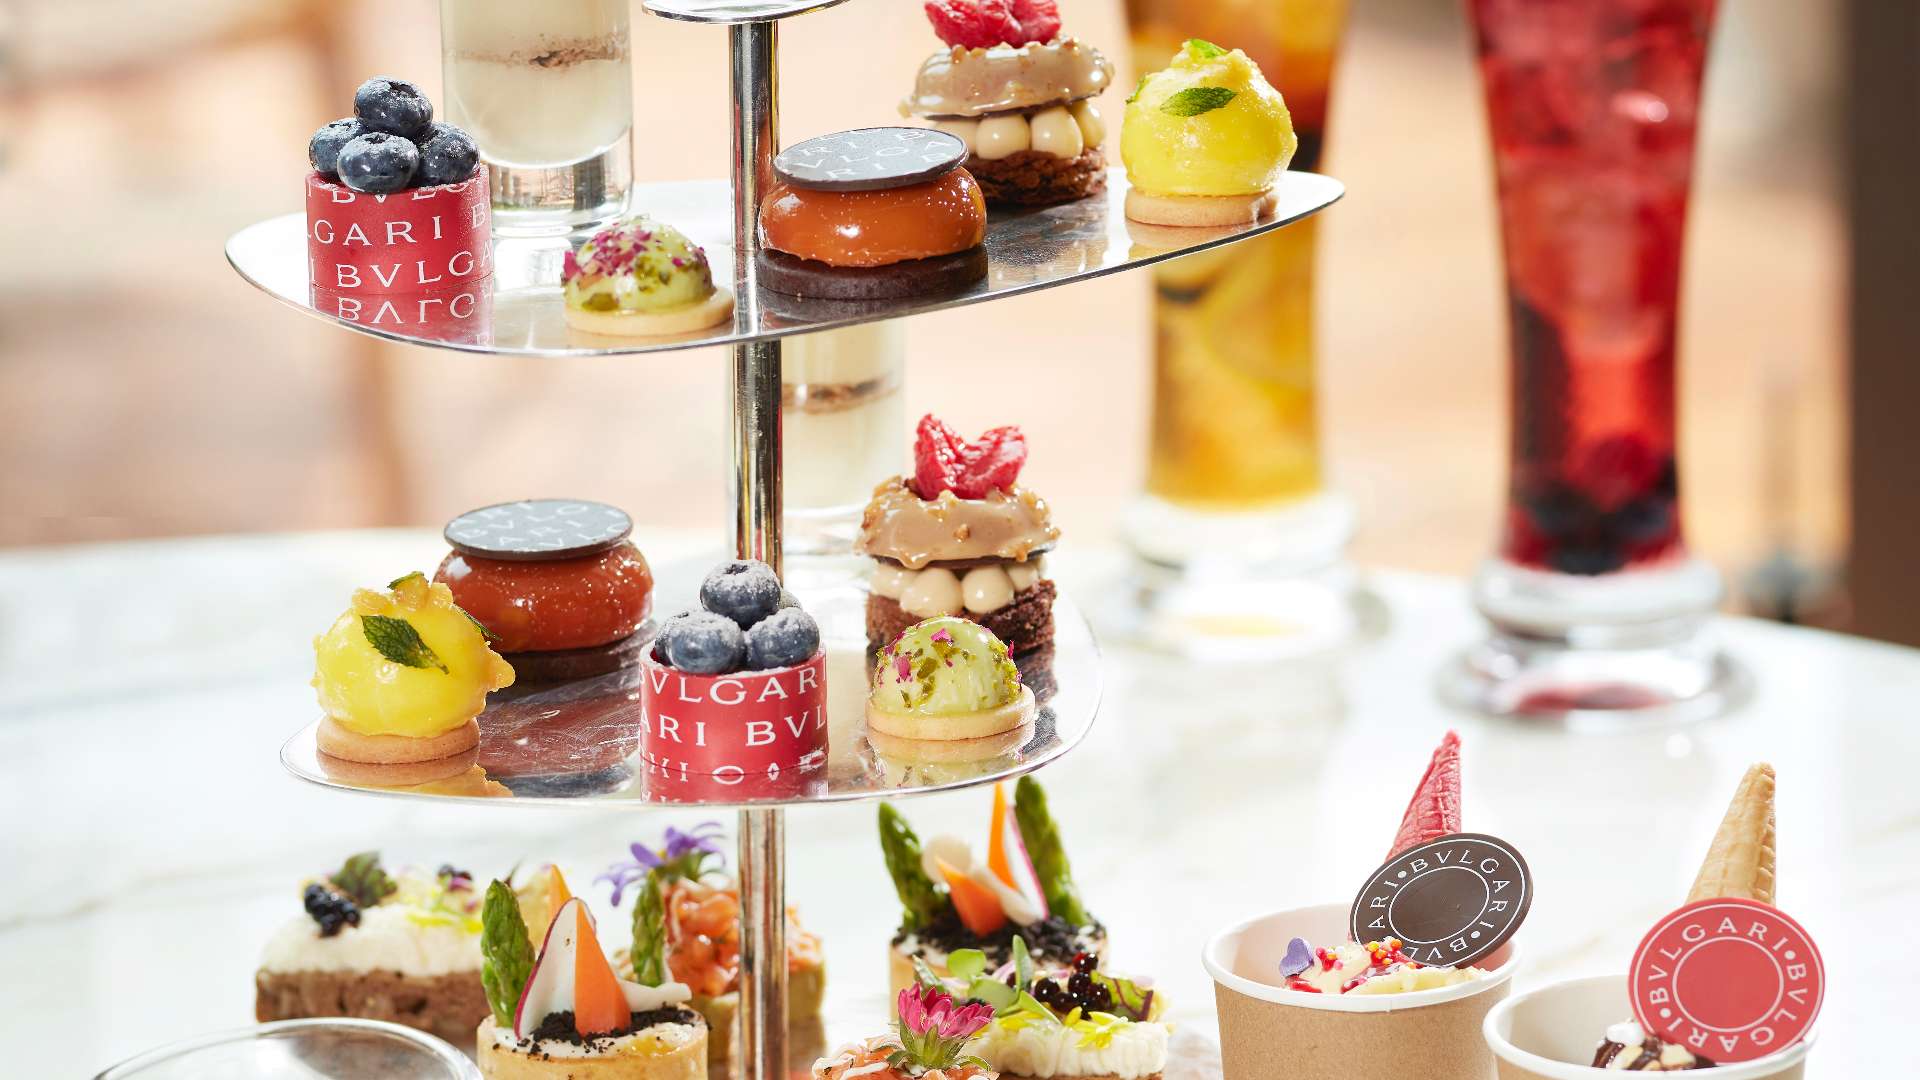 Afternoon Tea is an elegant escape from the ordinary